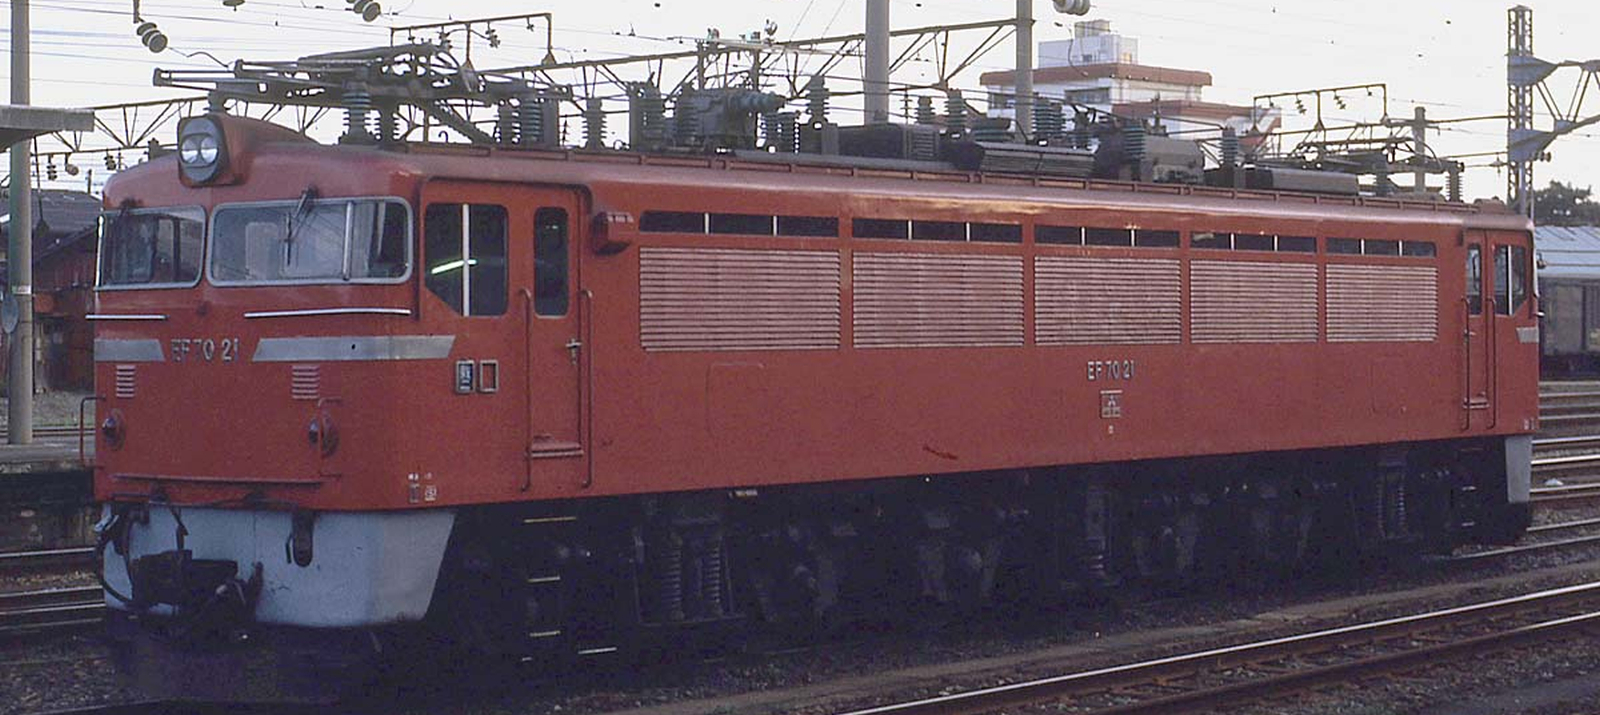 EF70 21 in August 1983 at Toyama